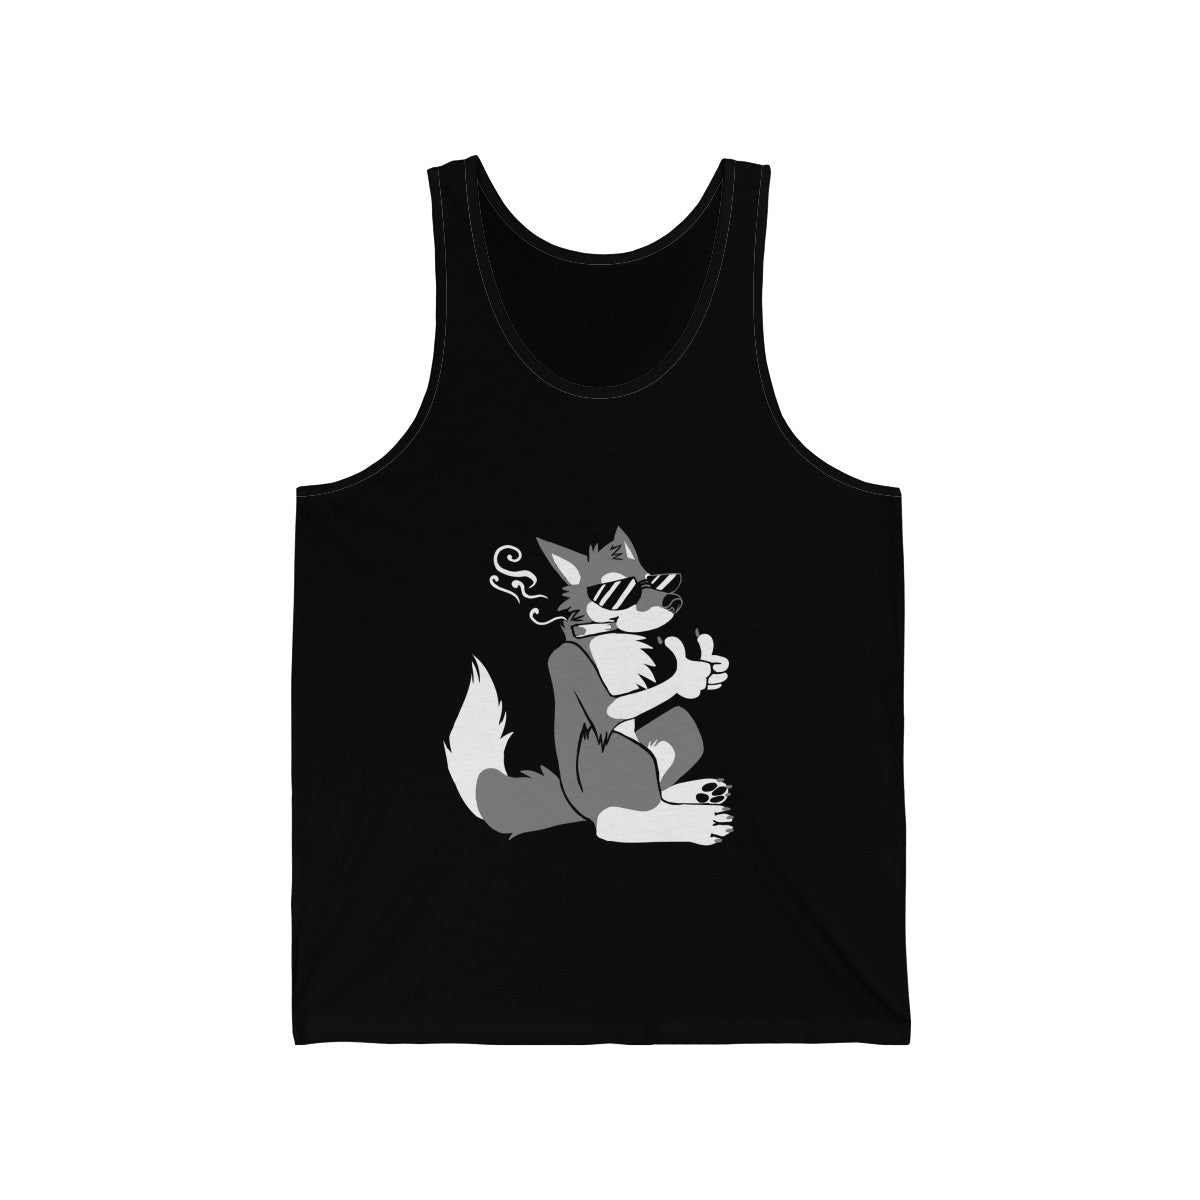 Chill Out - Tank Top Tank Top Dire Creatures Black XS 